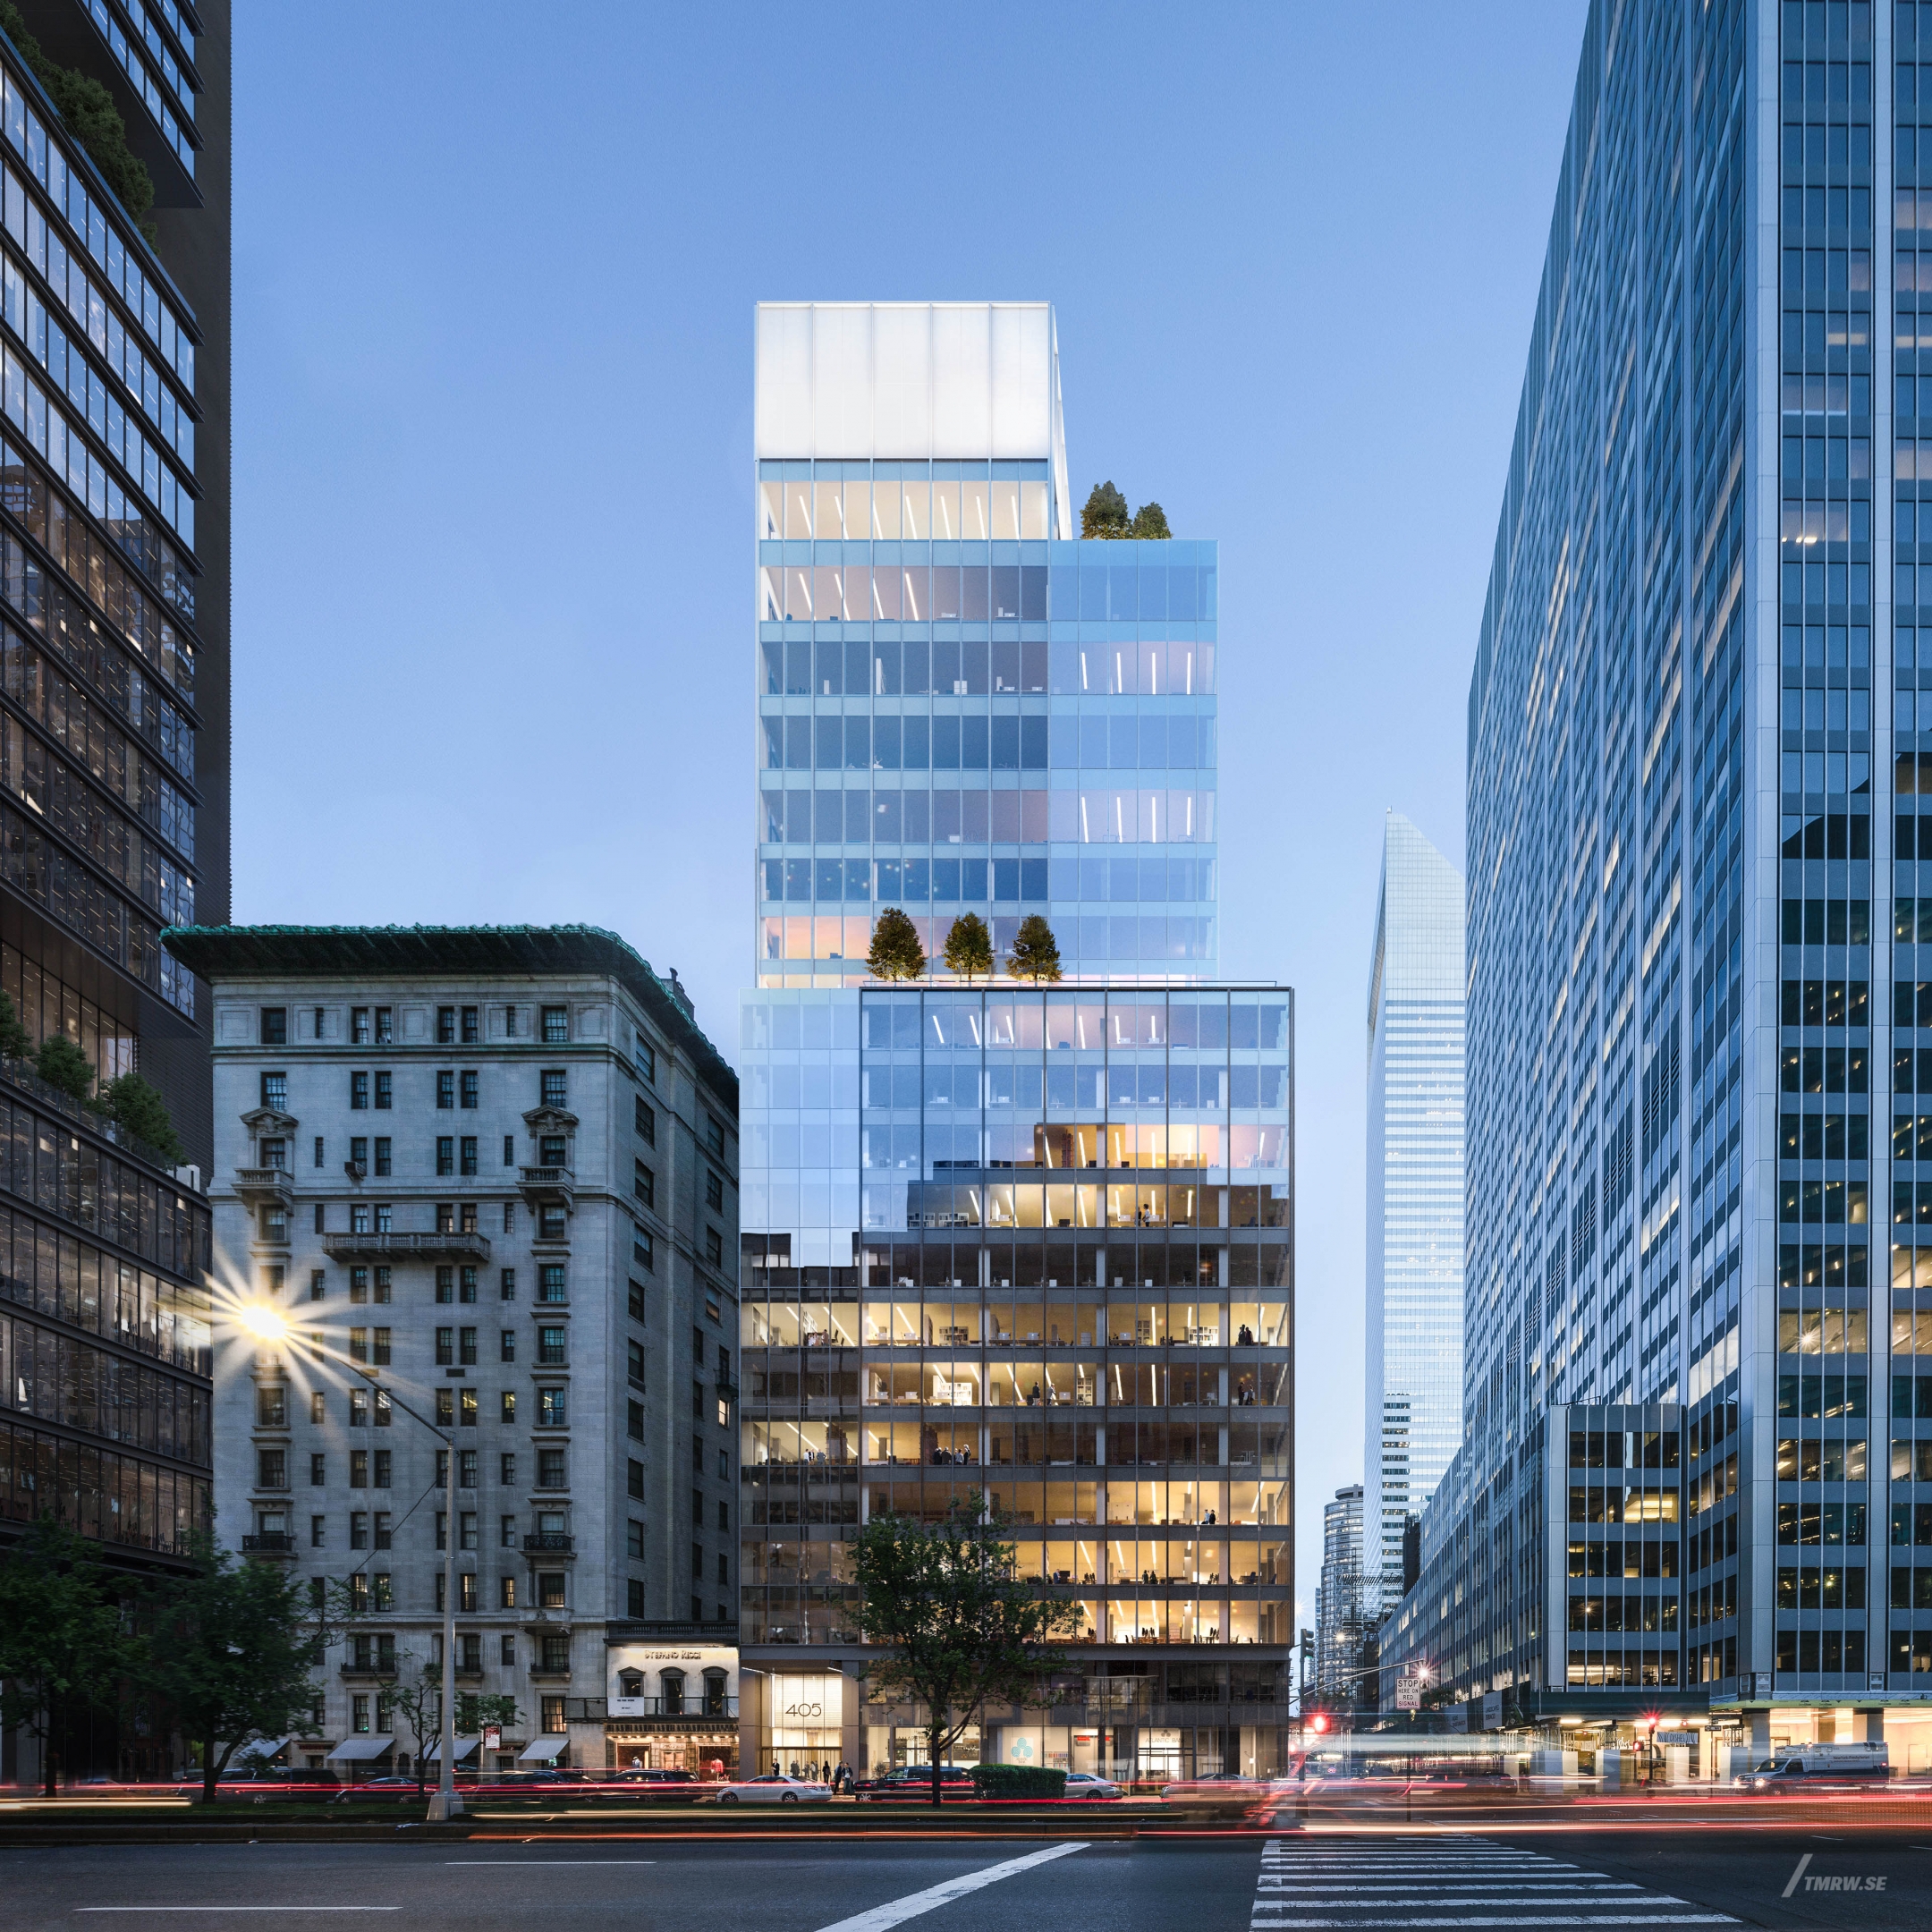 Architectural visualization of 405 Park for Gensler, an office building in bluehour light from a street view.